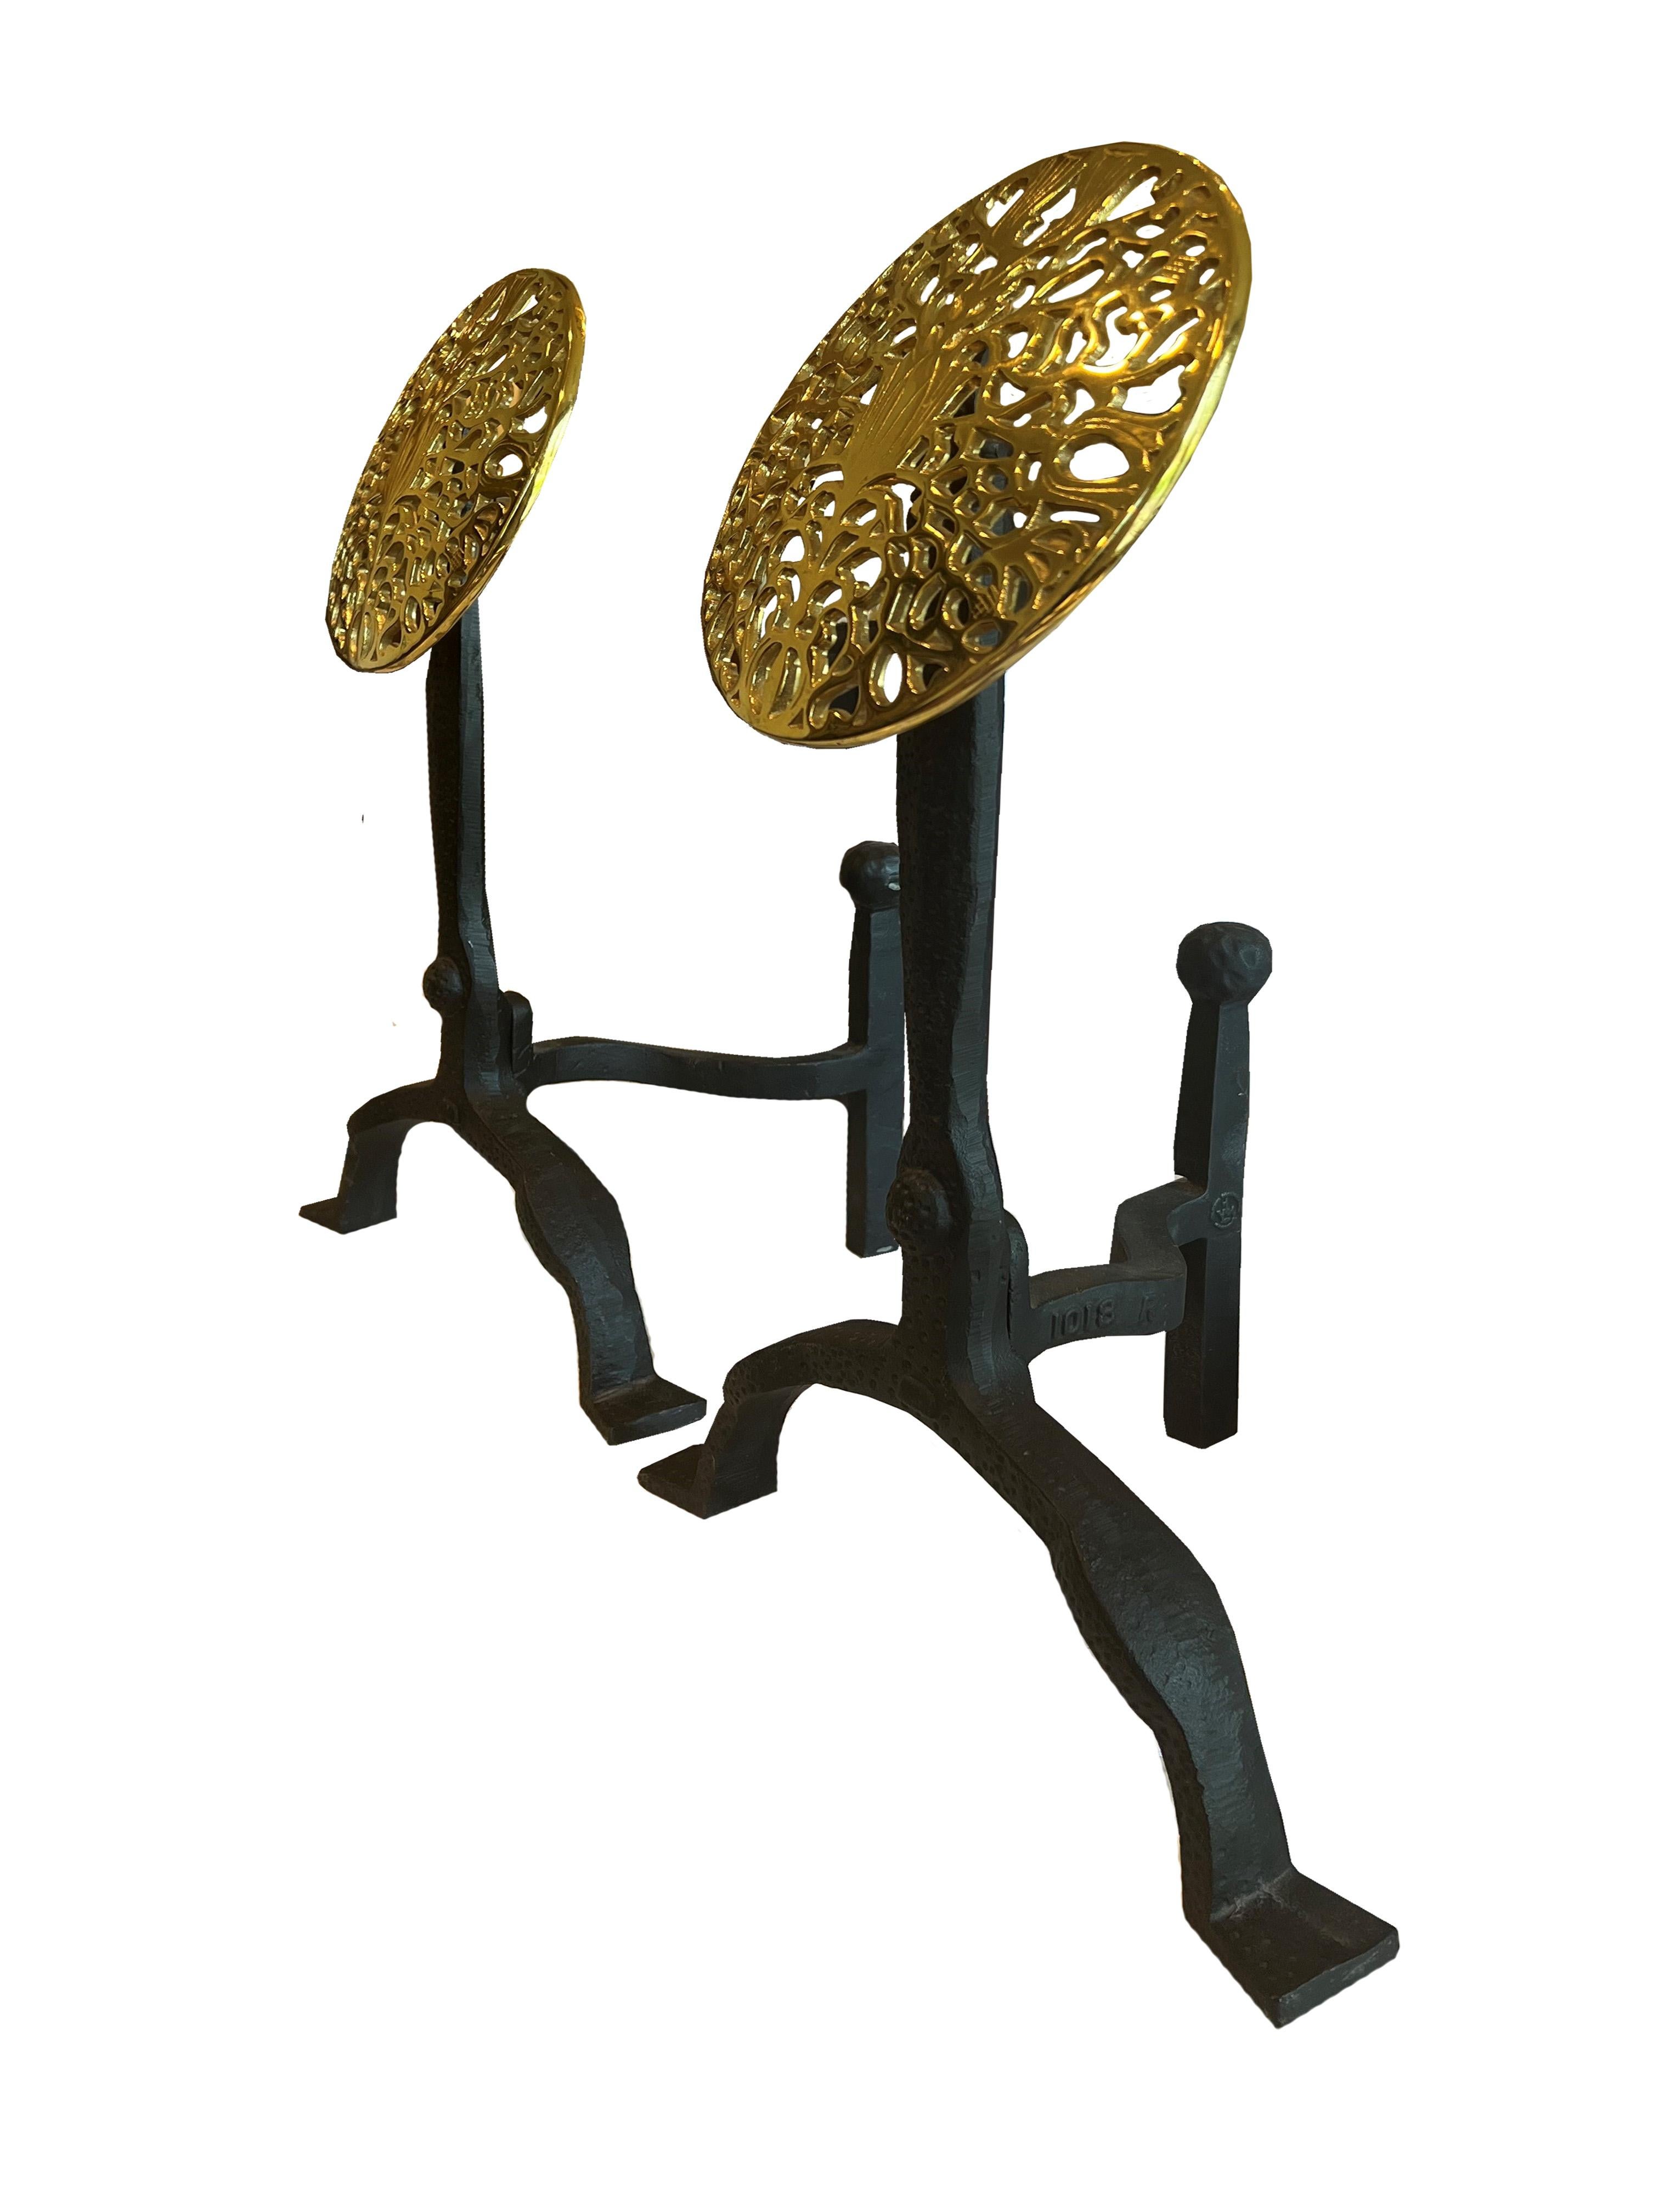 Discover the epitome of vintage charm and sophistication with this exquisite pair of Art Deco fireplace andirons, a splendid fusion of form and function. Meticulously crafted, each andiron rests on a black iron base, which boasts a hammered texture